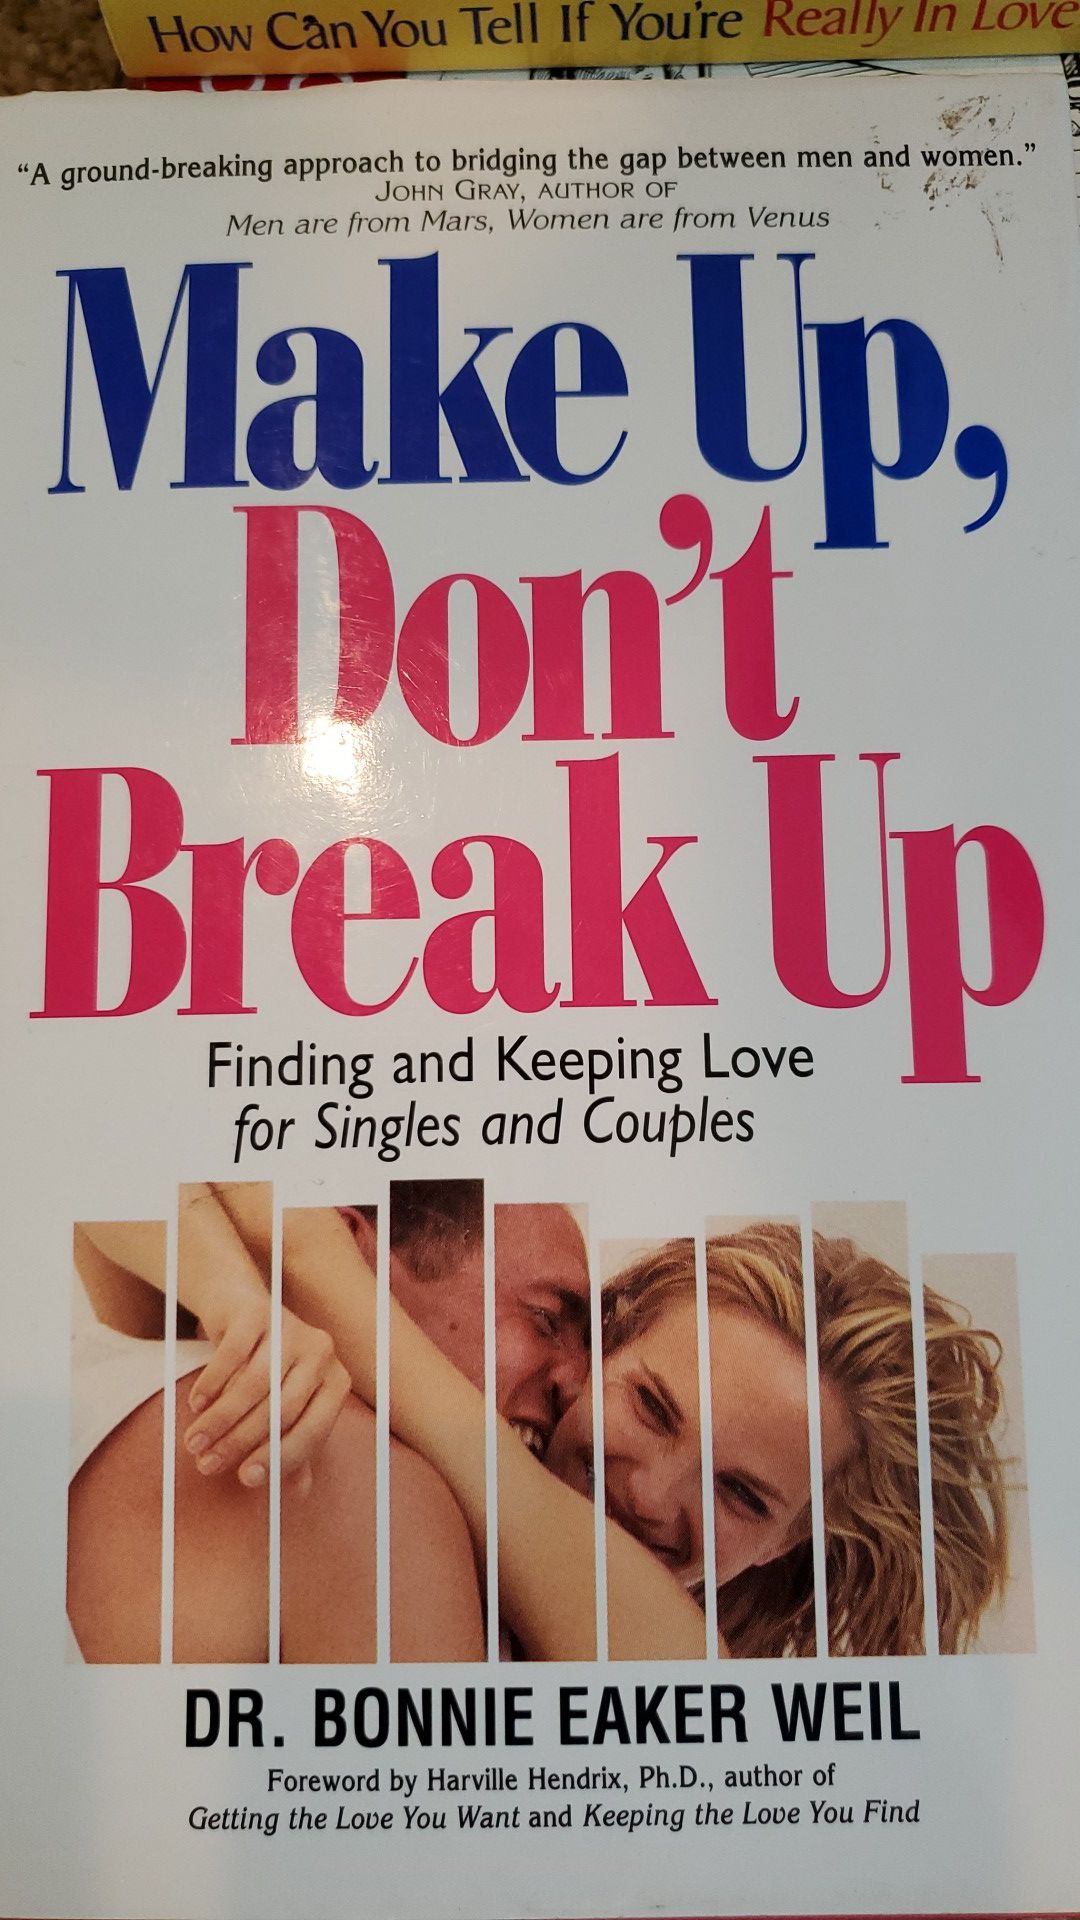 Make Up, Don't Break Up by Dr. Bonnie Waker Weil